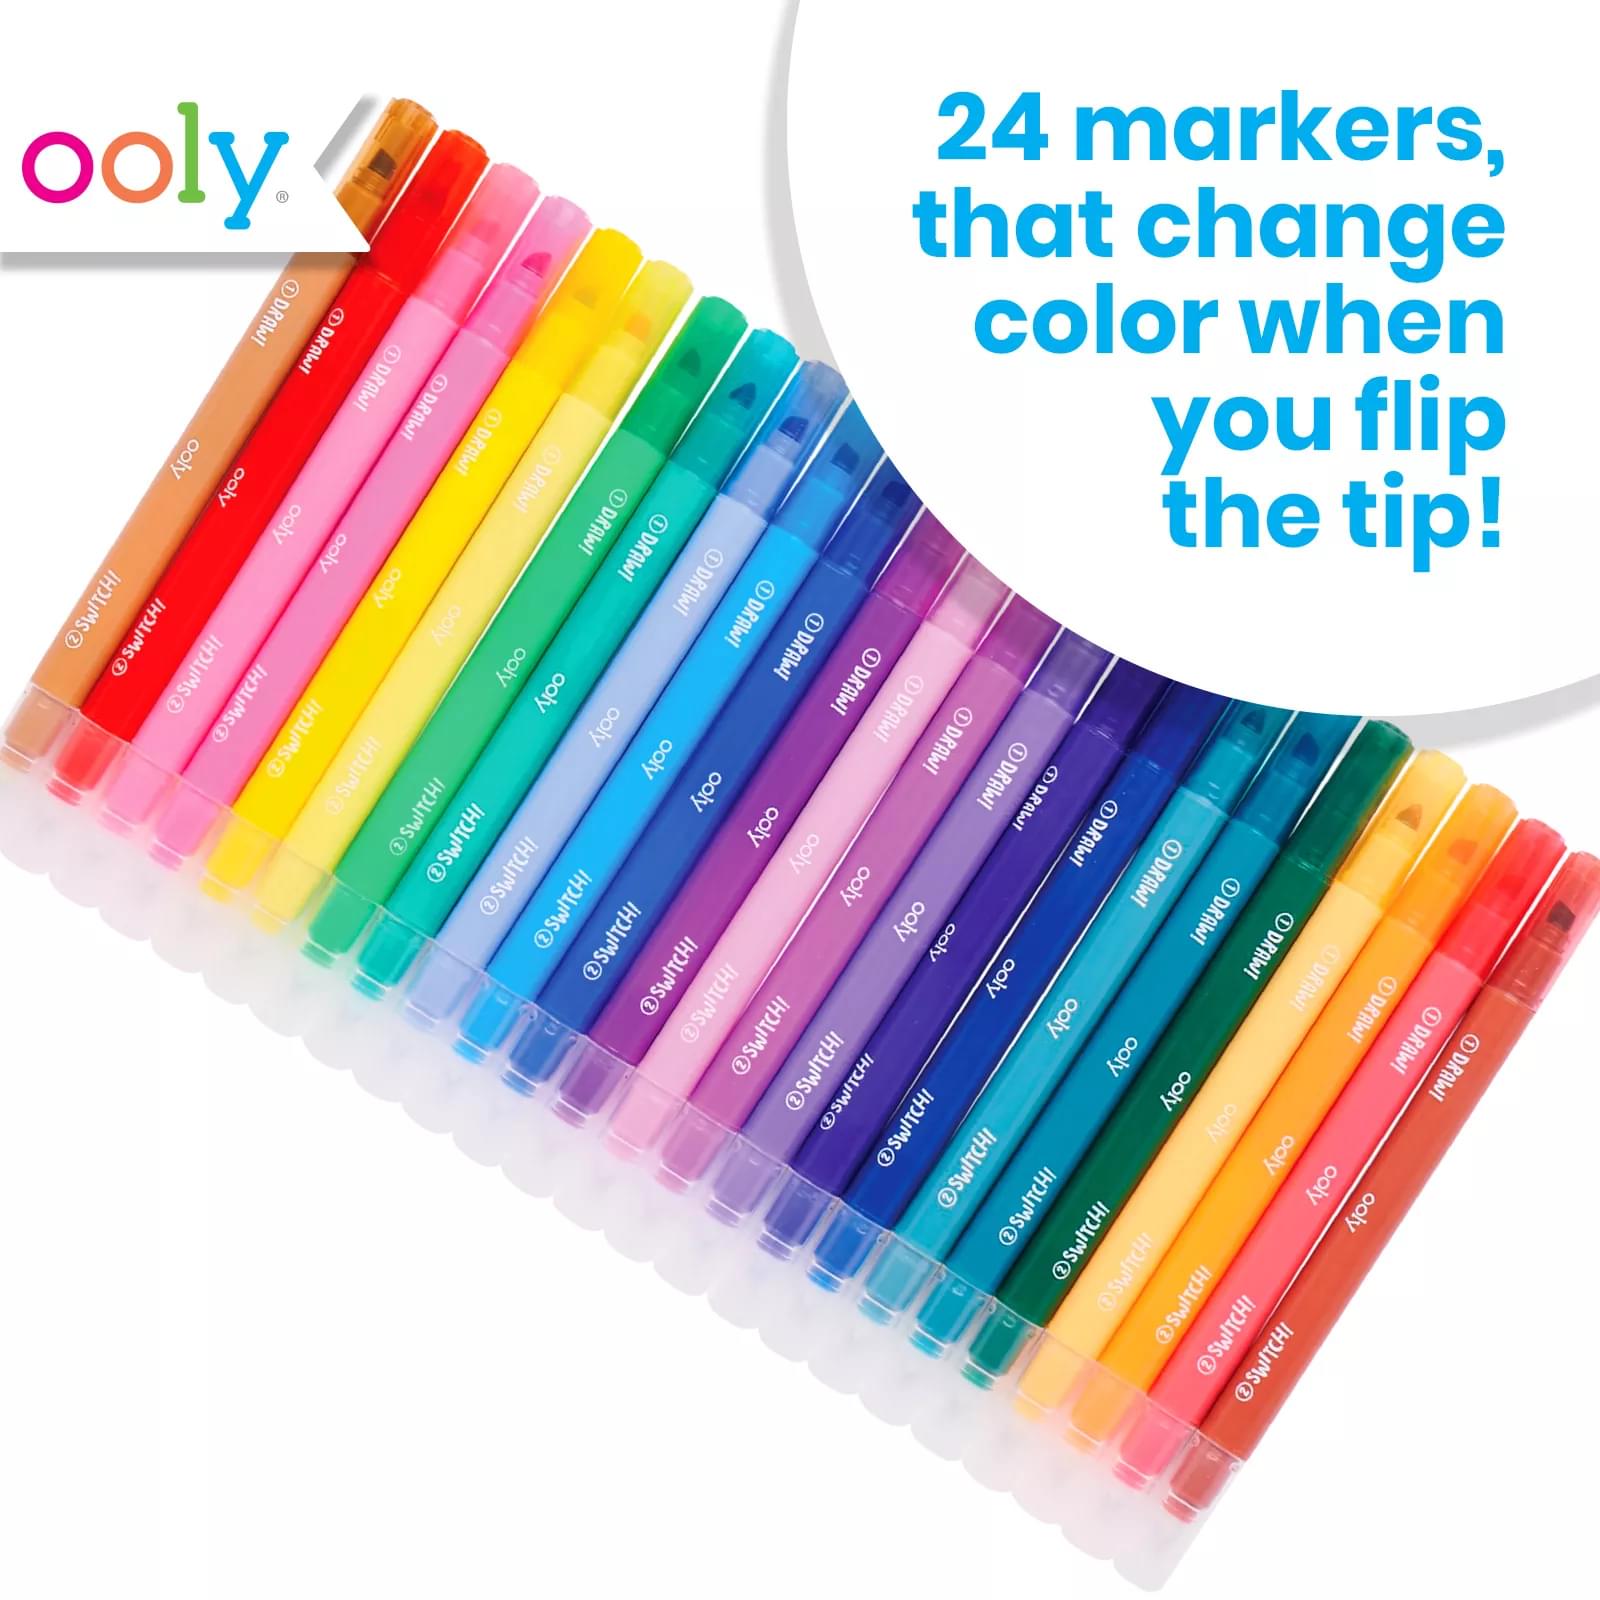 Color Changing Markers - Switch-EROO– Andnest